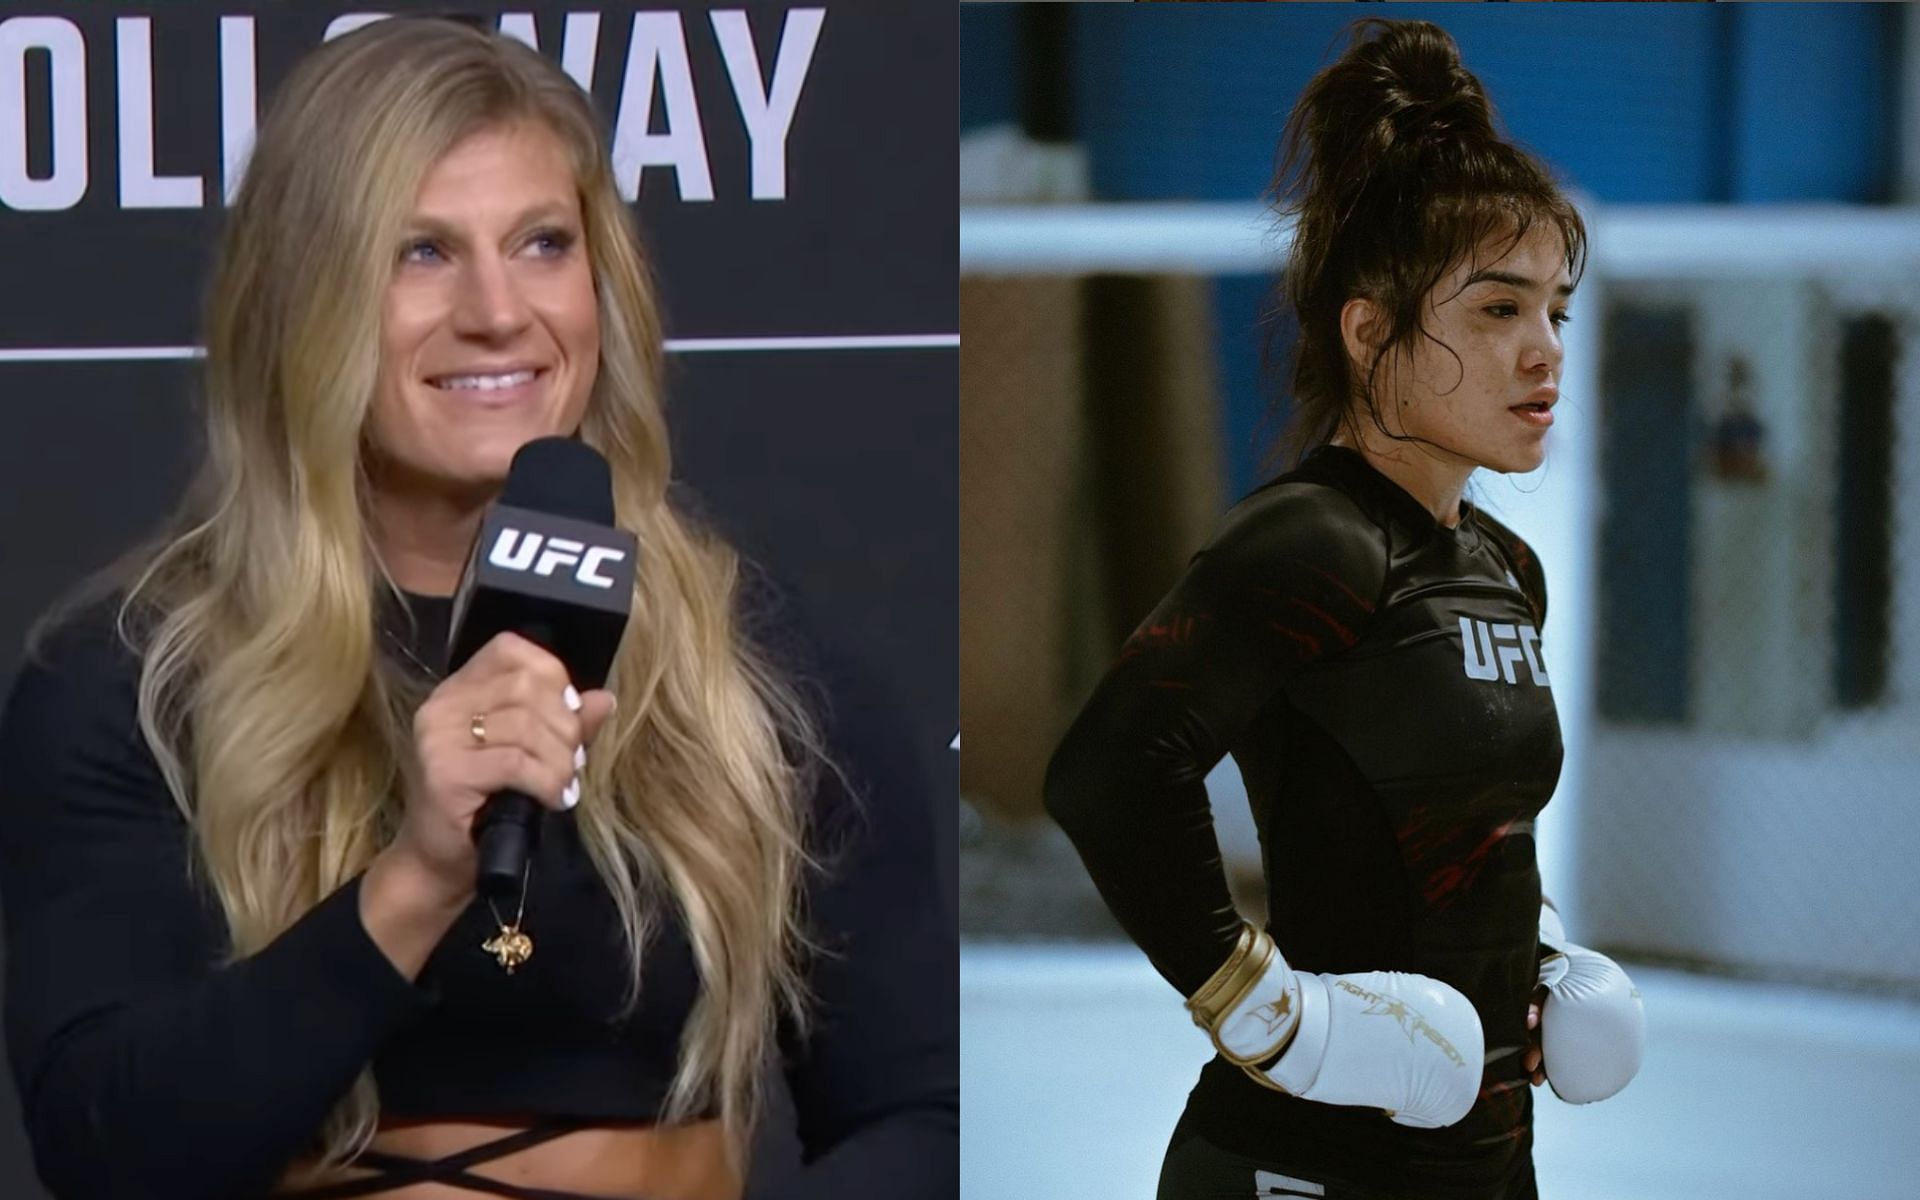 Tracy Cortez (right) shockingly reacted to Kayla Harrison